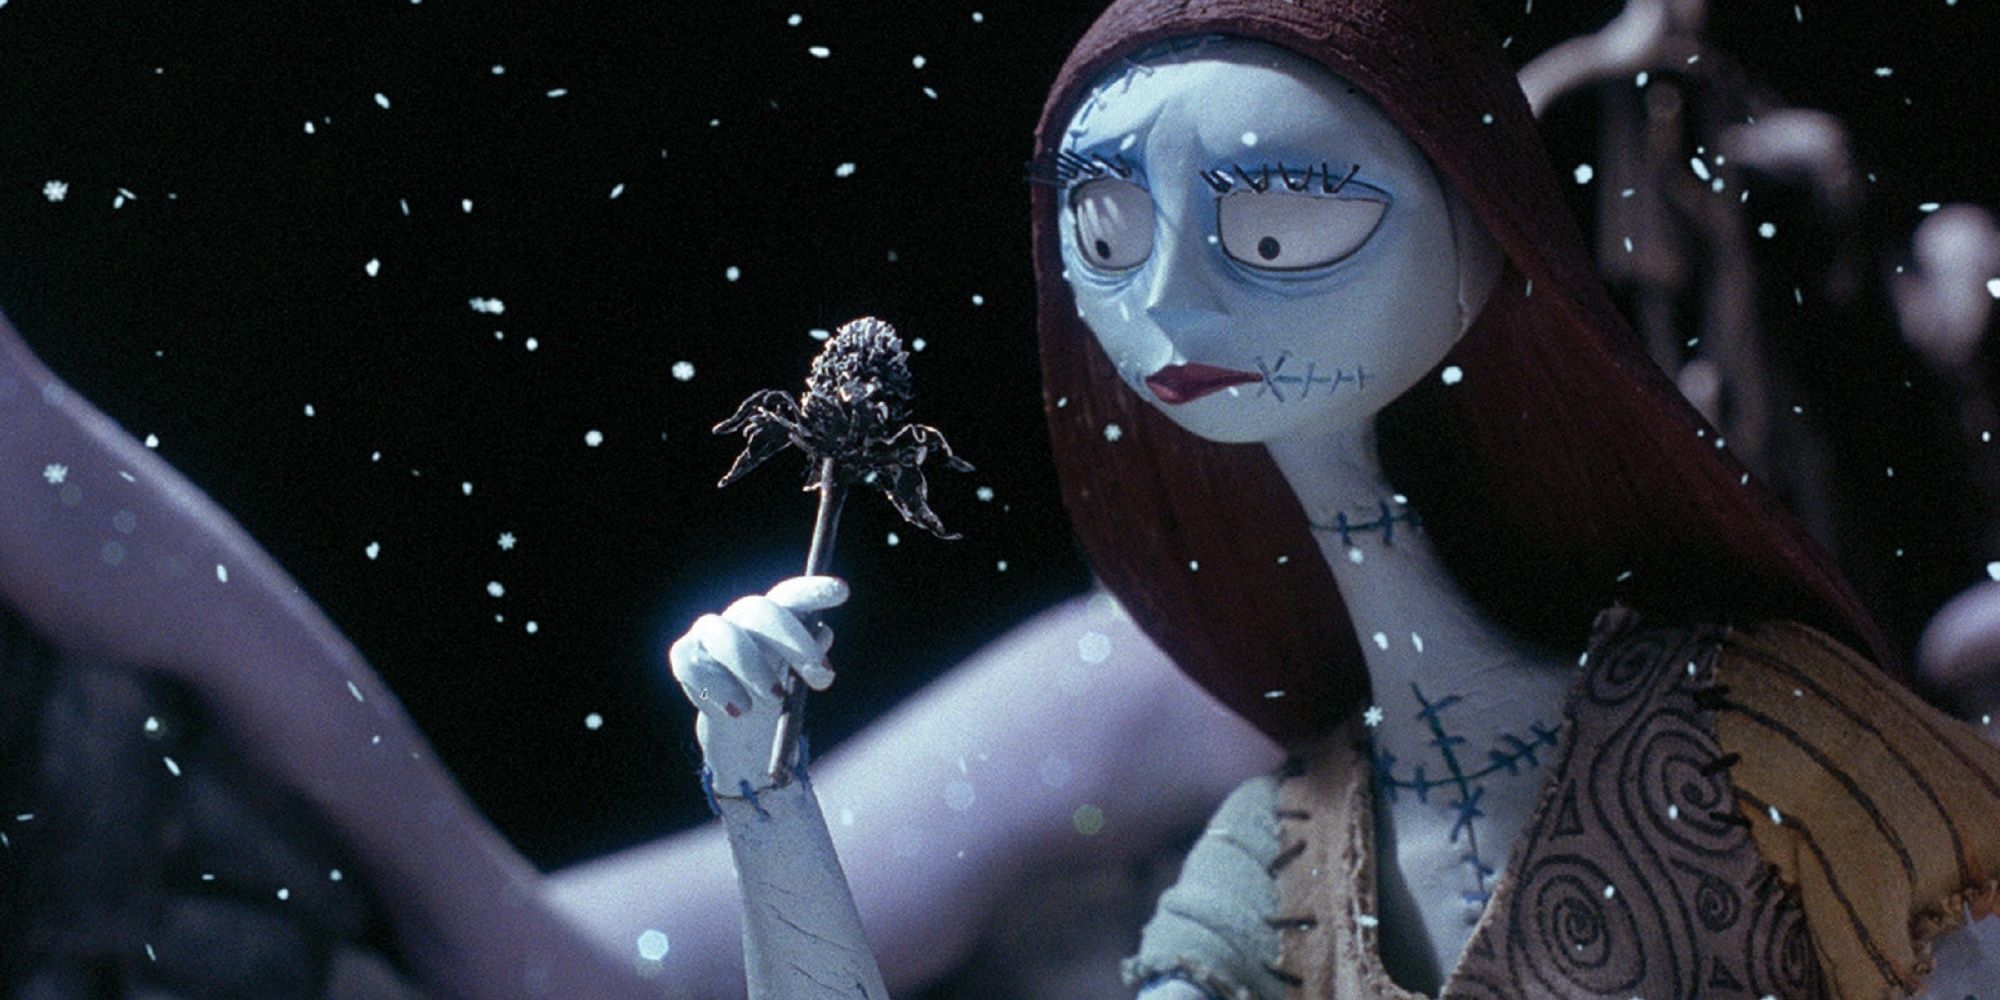 Sally holding a spider lollipop in the snow.